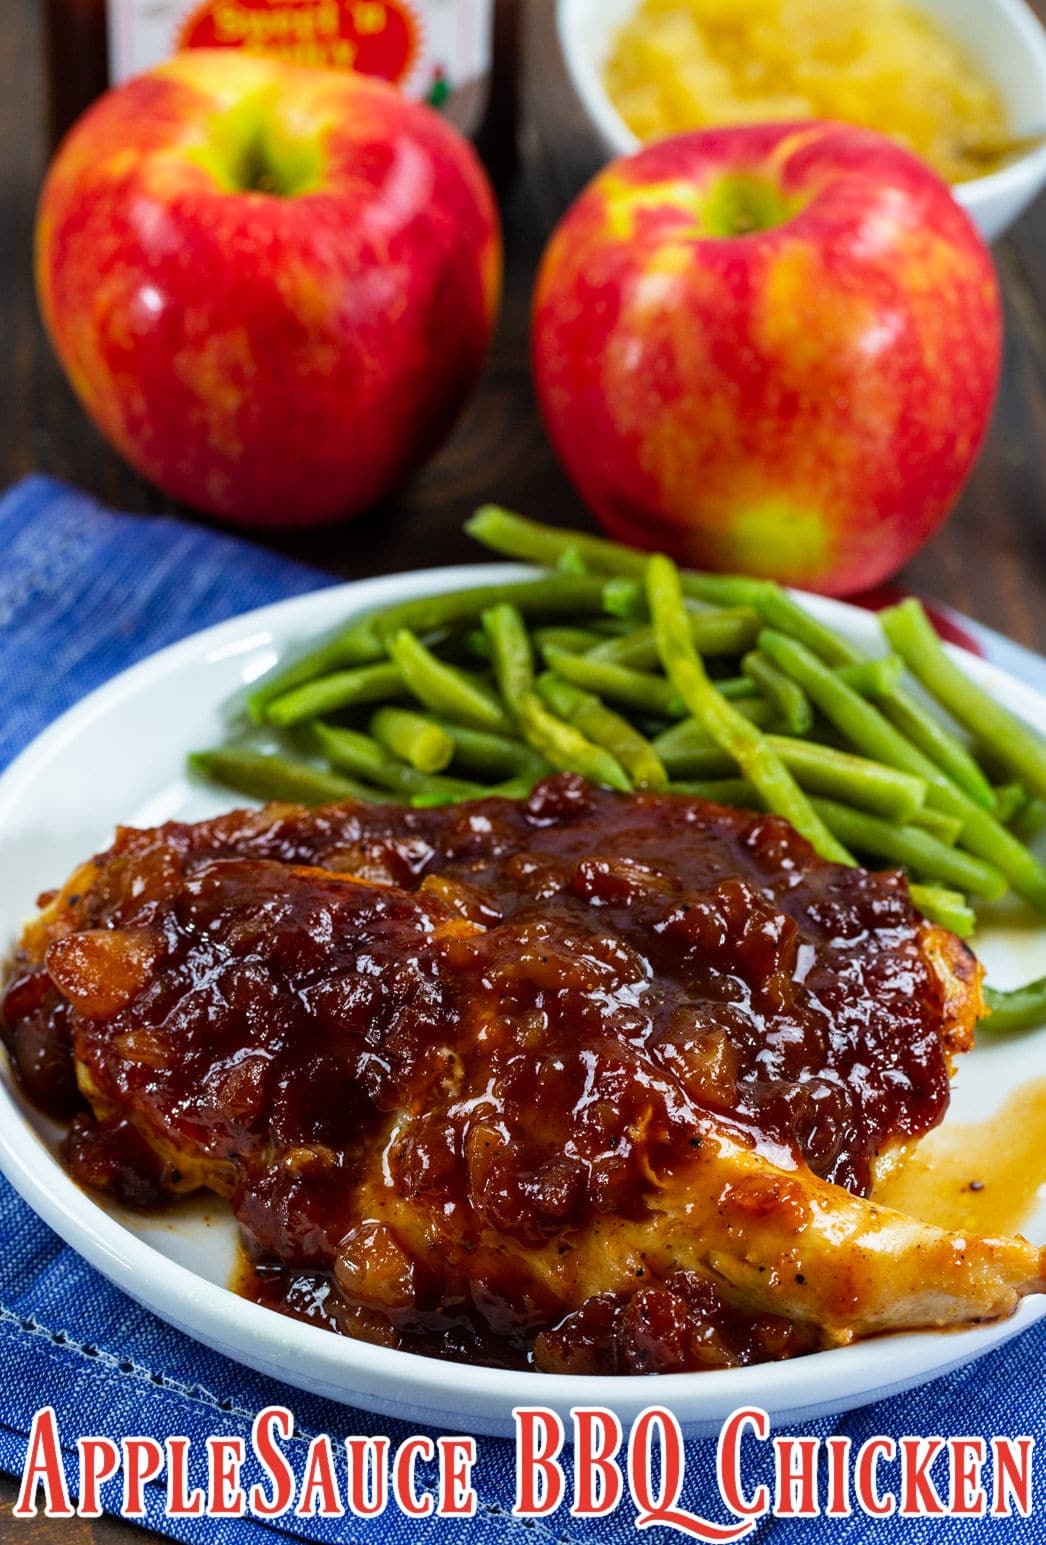 Applesauce BBQ Chicken on a plate with green beans.